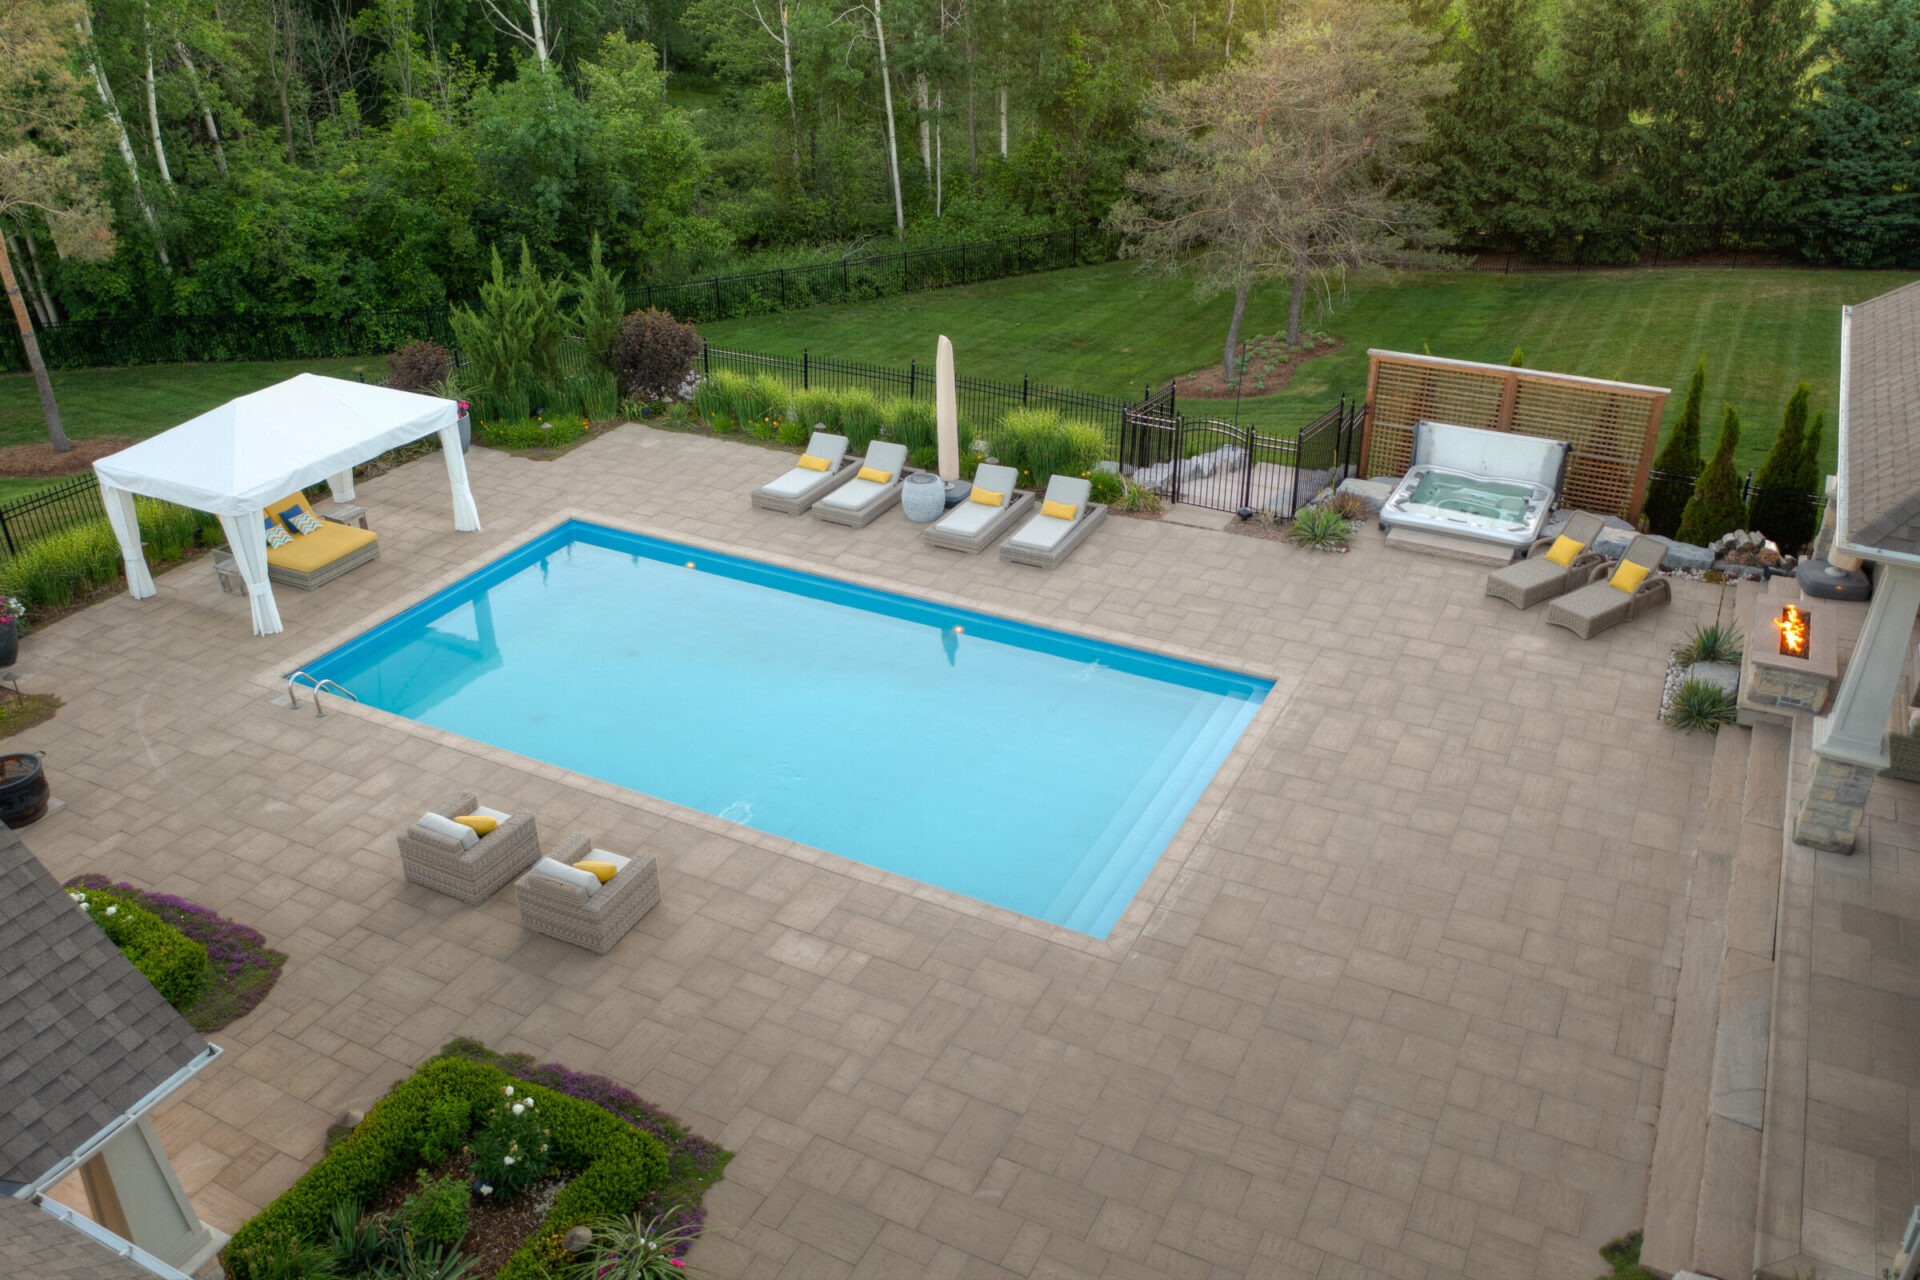 An aerial view of a backyard with a rectangular swimming pool, lounge chairs, a jacuzzi, a pergola, fire pit, and landscaped garden near a forest.